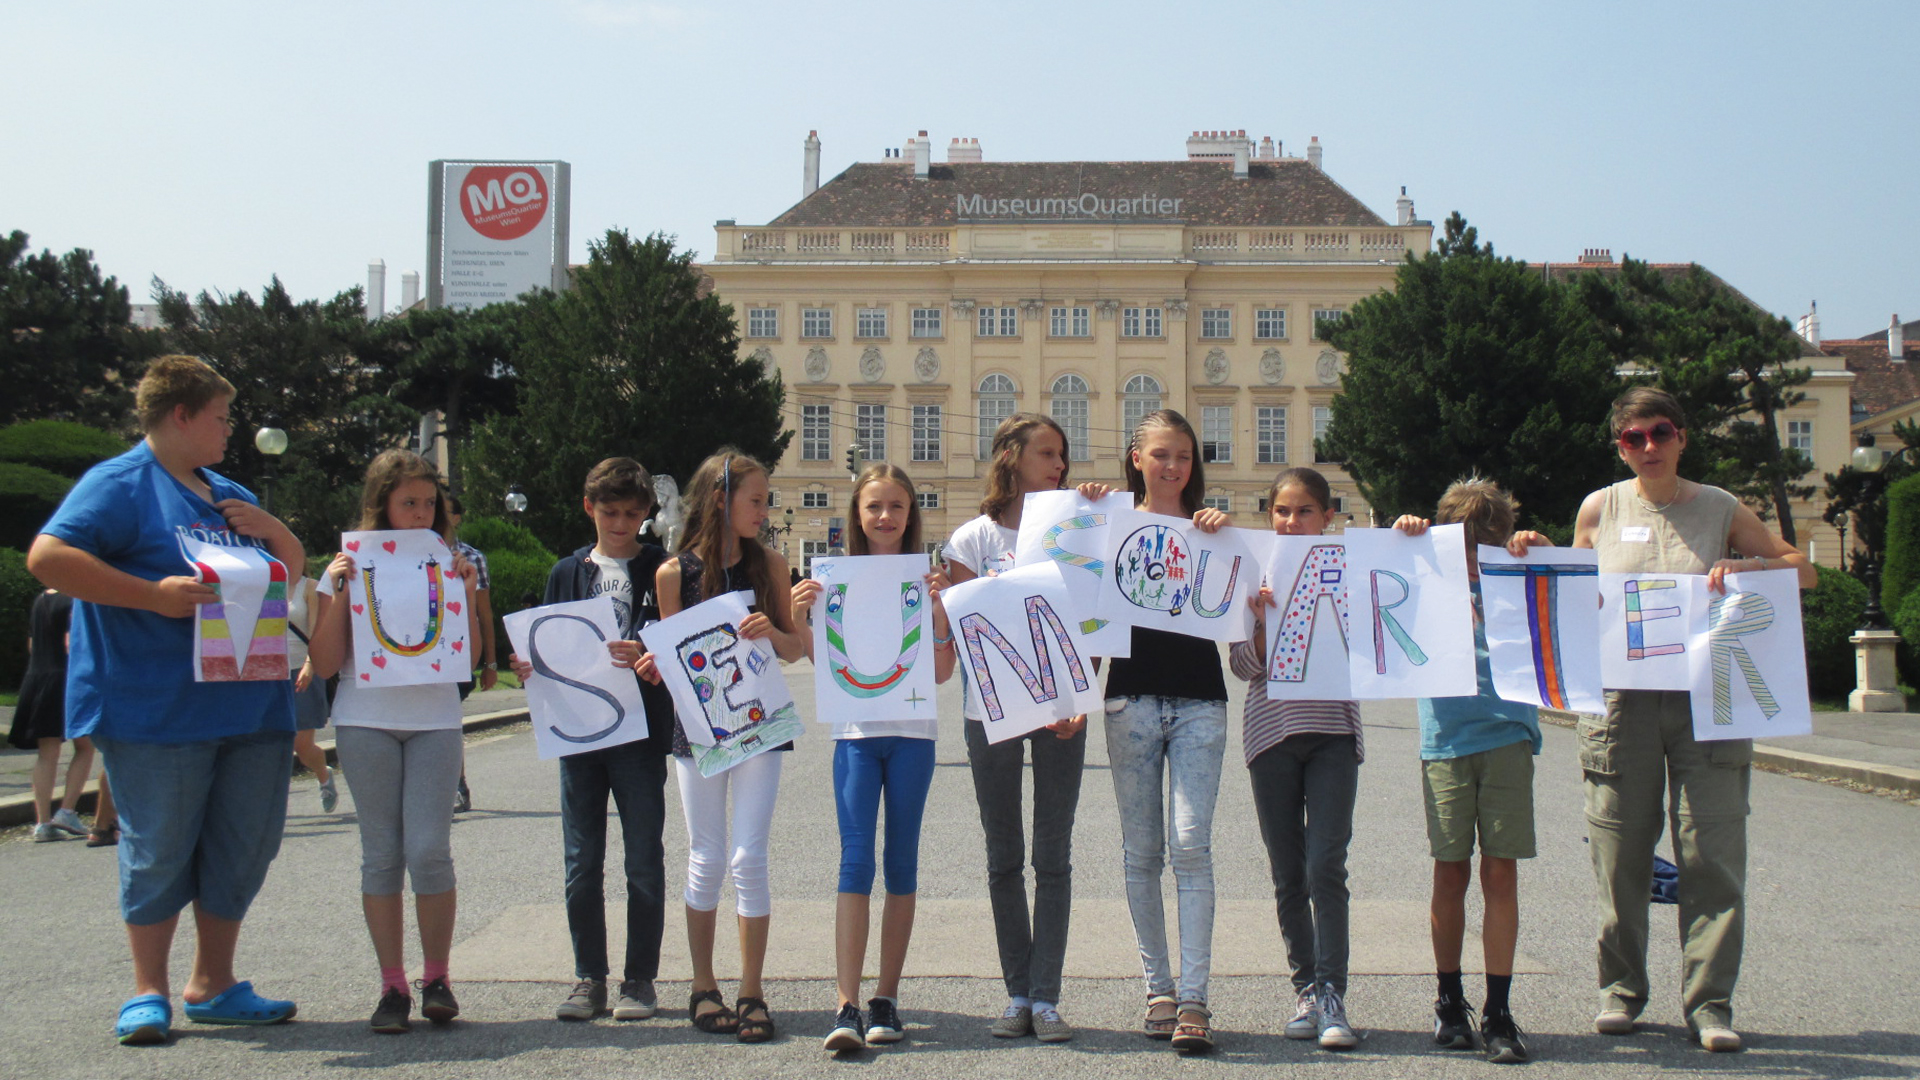 10 children stand in front of the Museumsquartier, holding up painted letters that spell the word Museumsquartier.